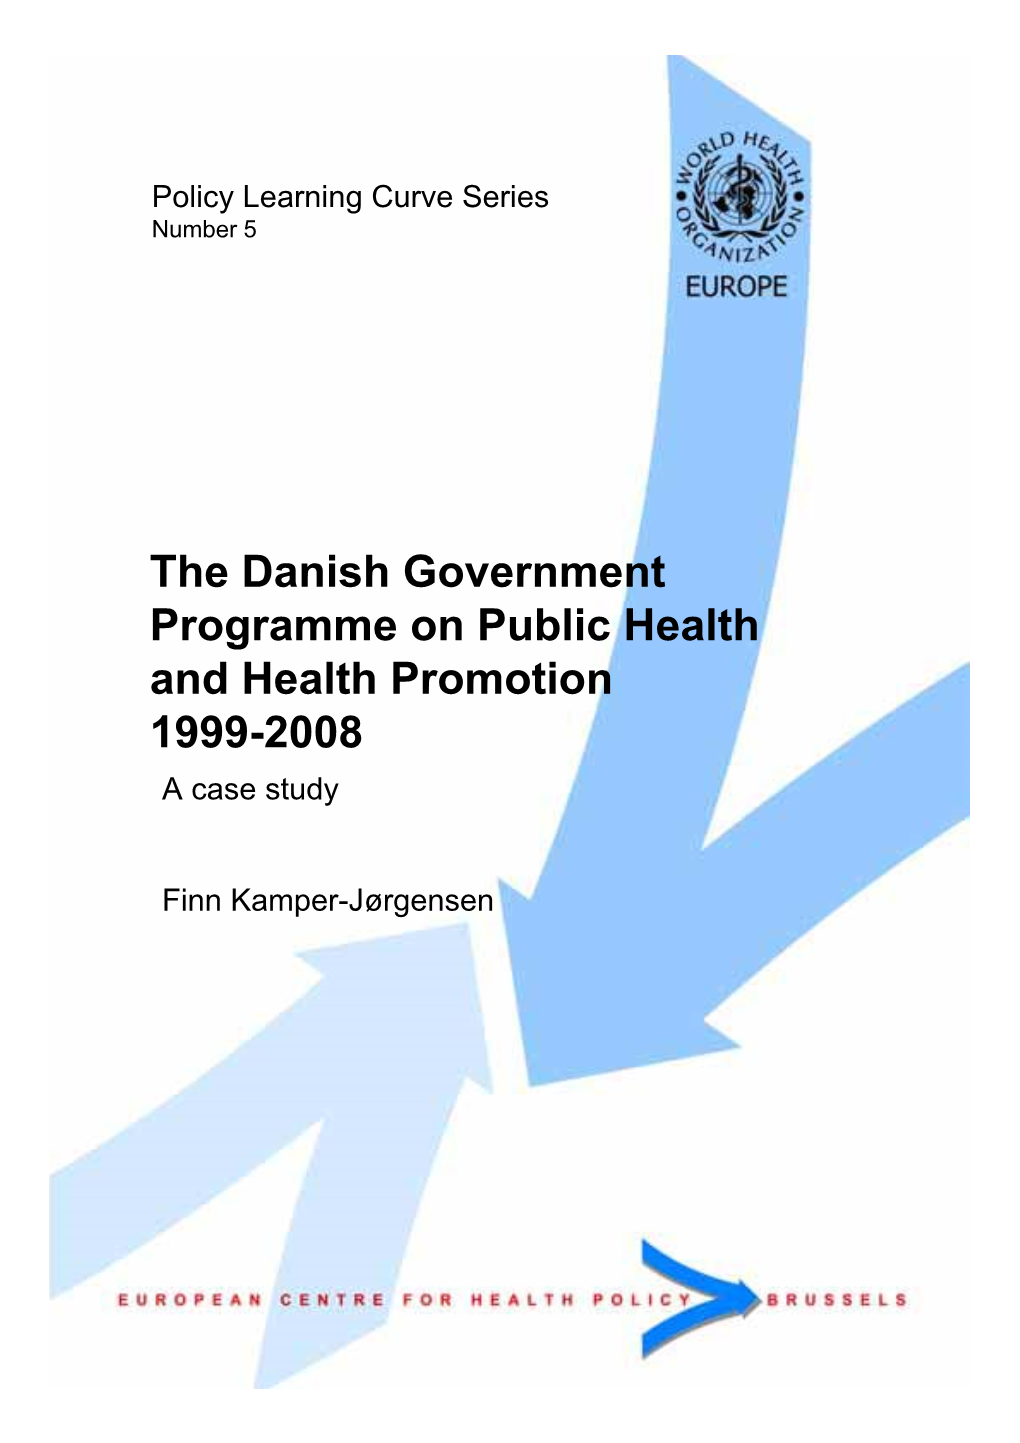 The Danish Government Programme on Public Health and Health Promotion 1999-2008 a Case Study